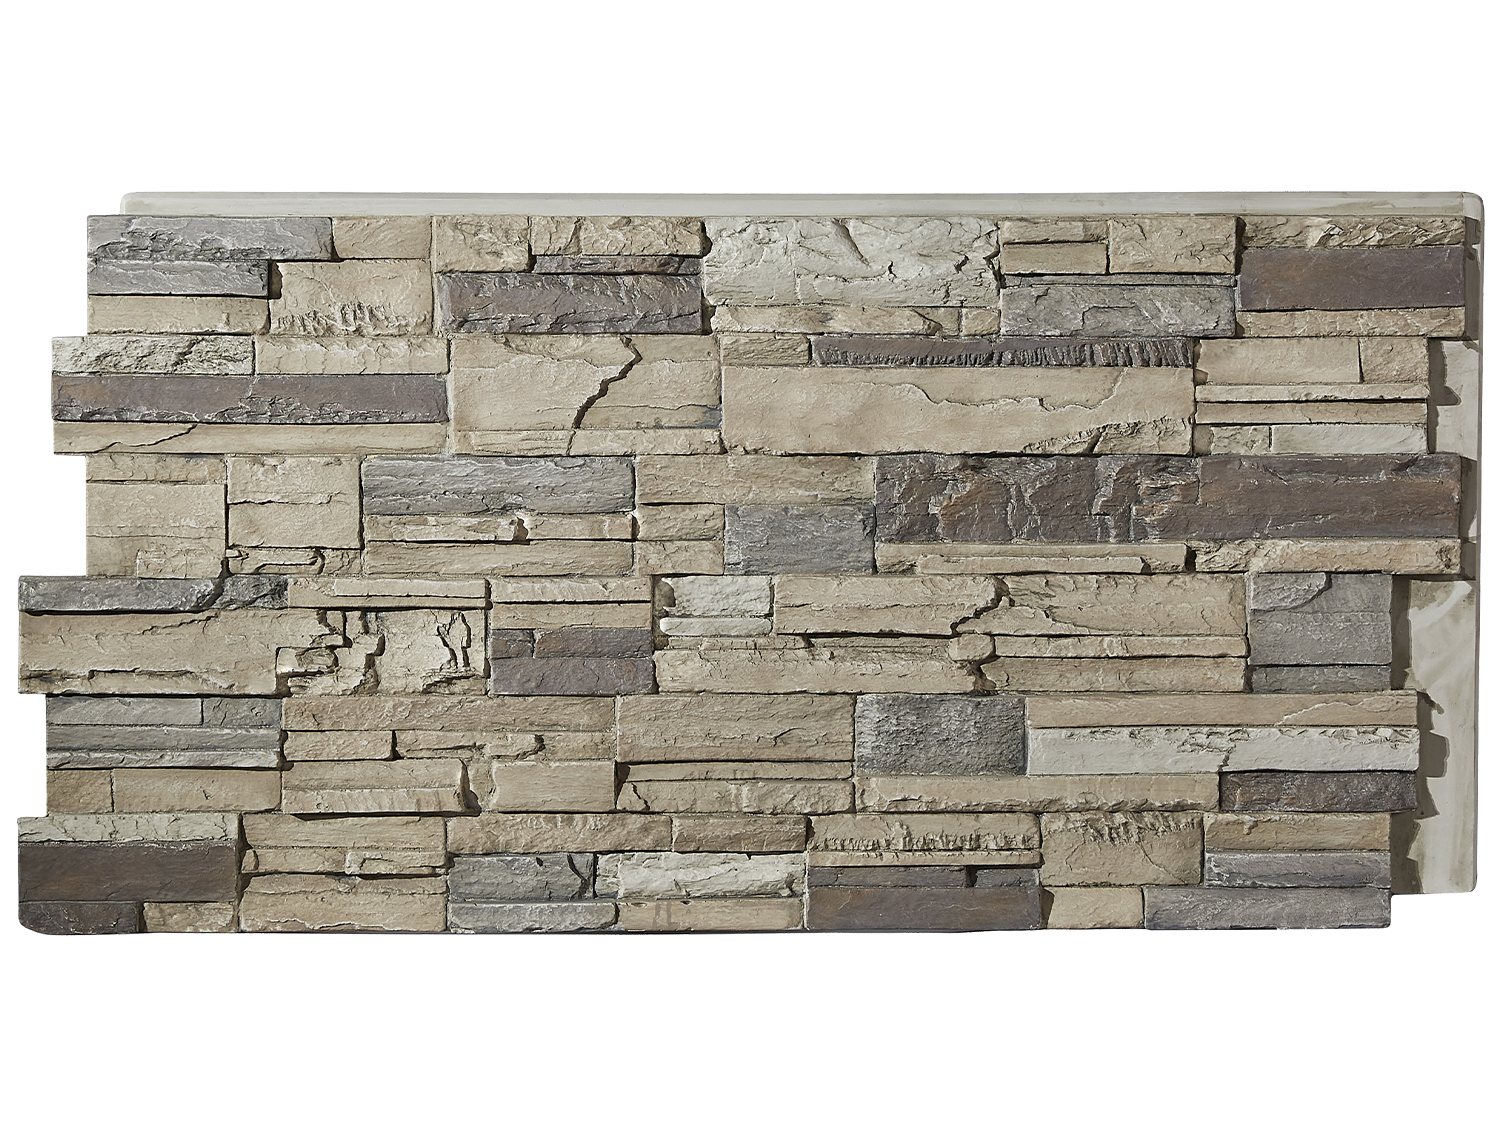 Where can I buy Kentucky Dry Stack faux stone wall panels?